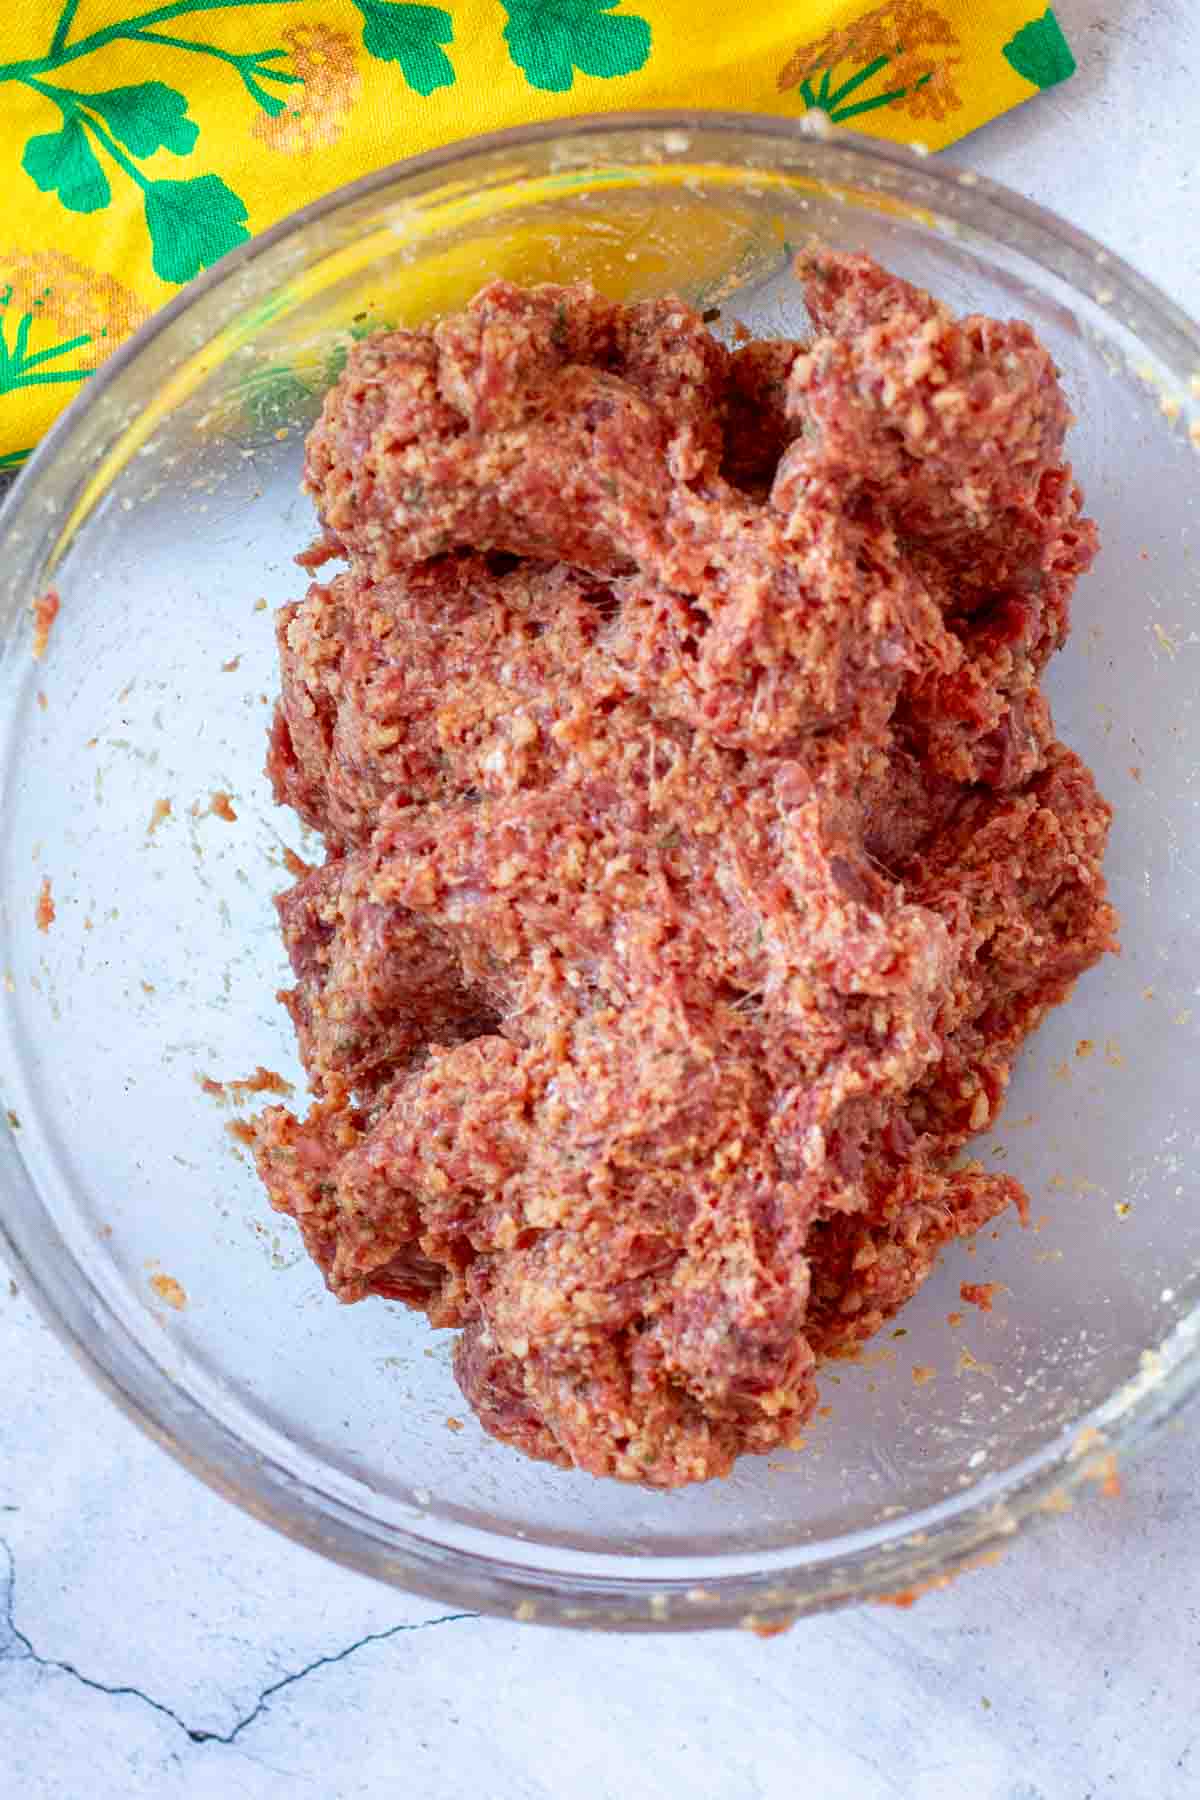 Mixture of ground lamb and ingredients to make spicy lamb meatballs.